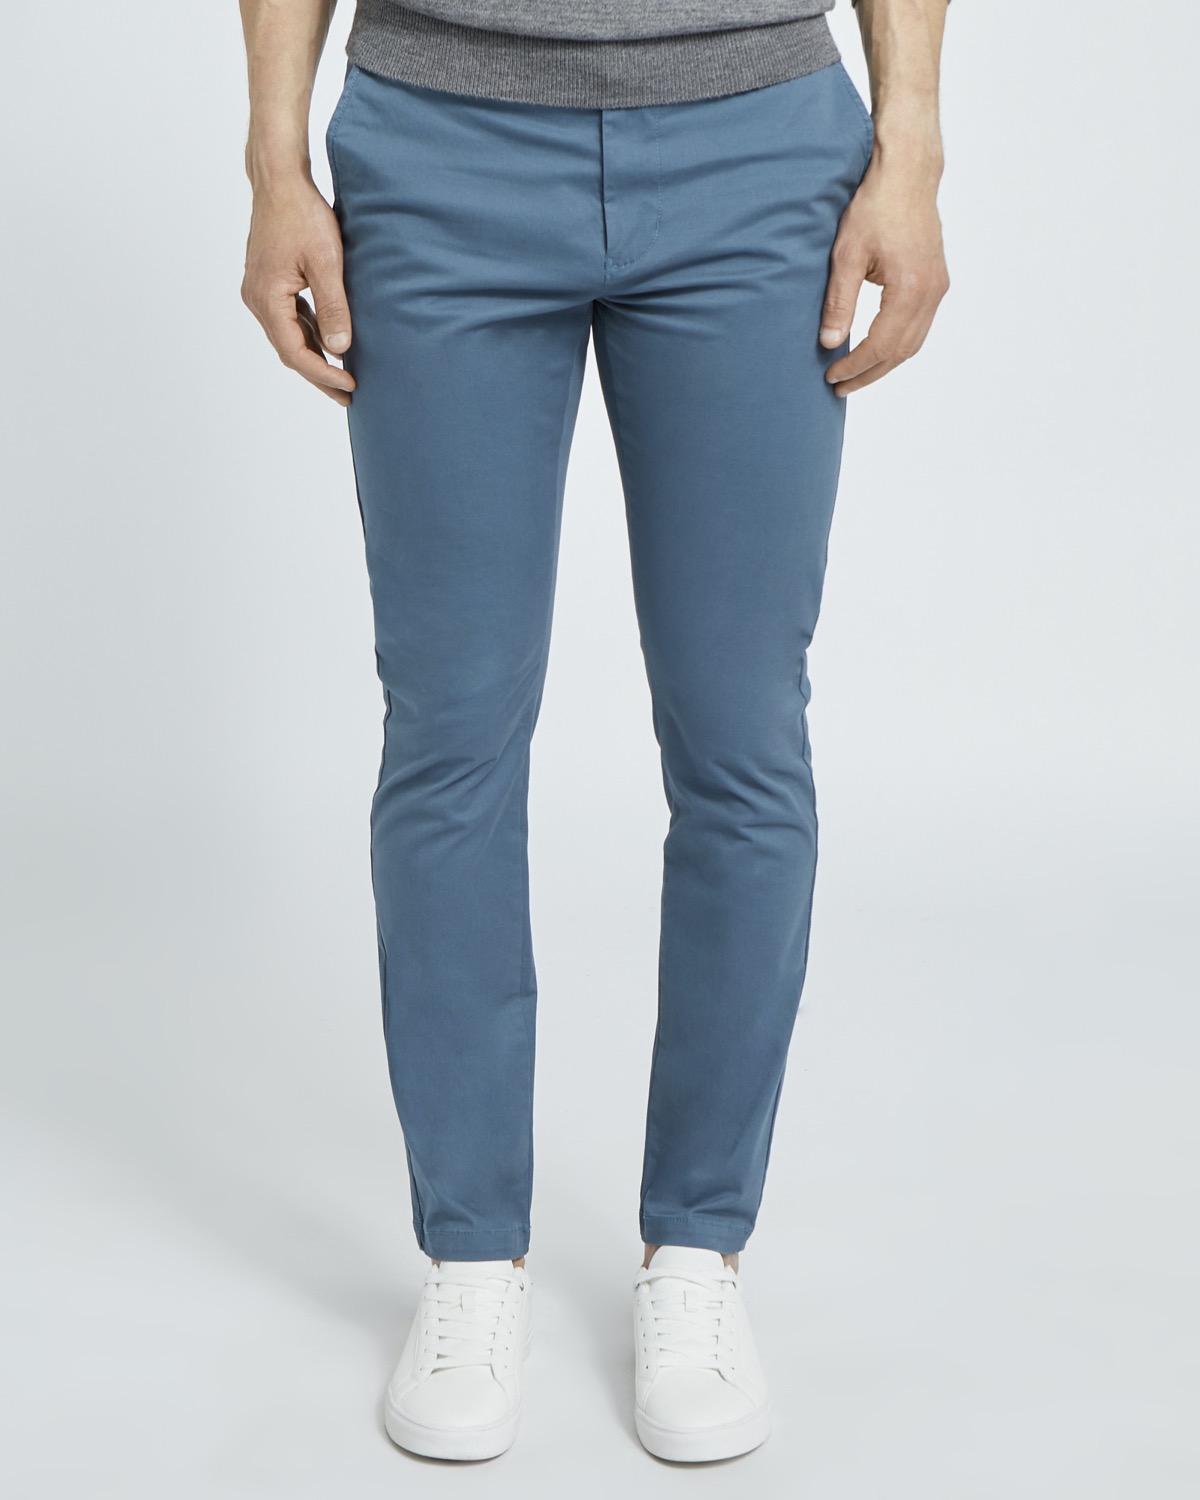 Dunnes Stores | Teal Slim Fit Stretch Chino